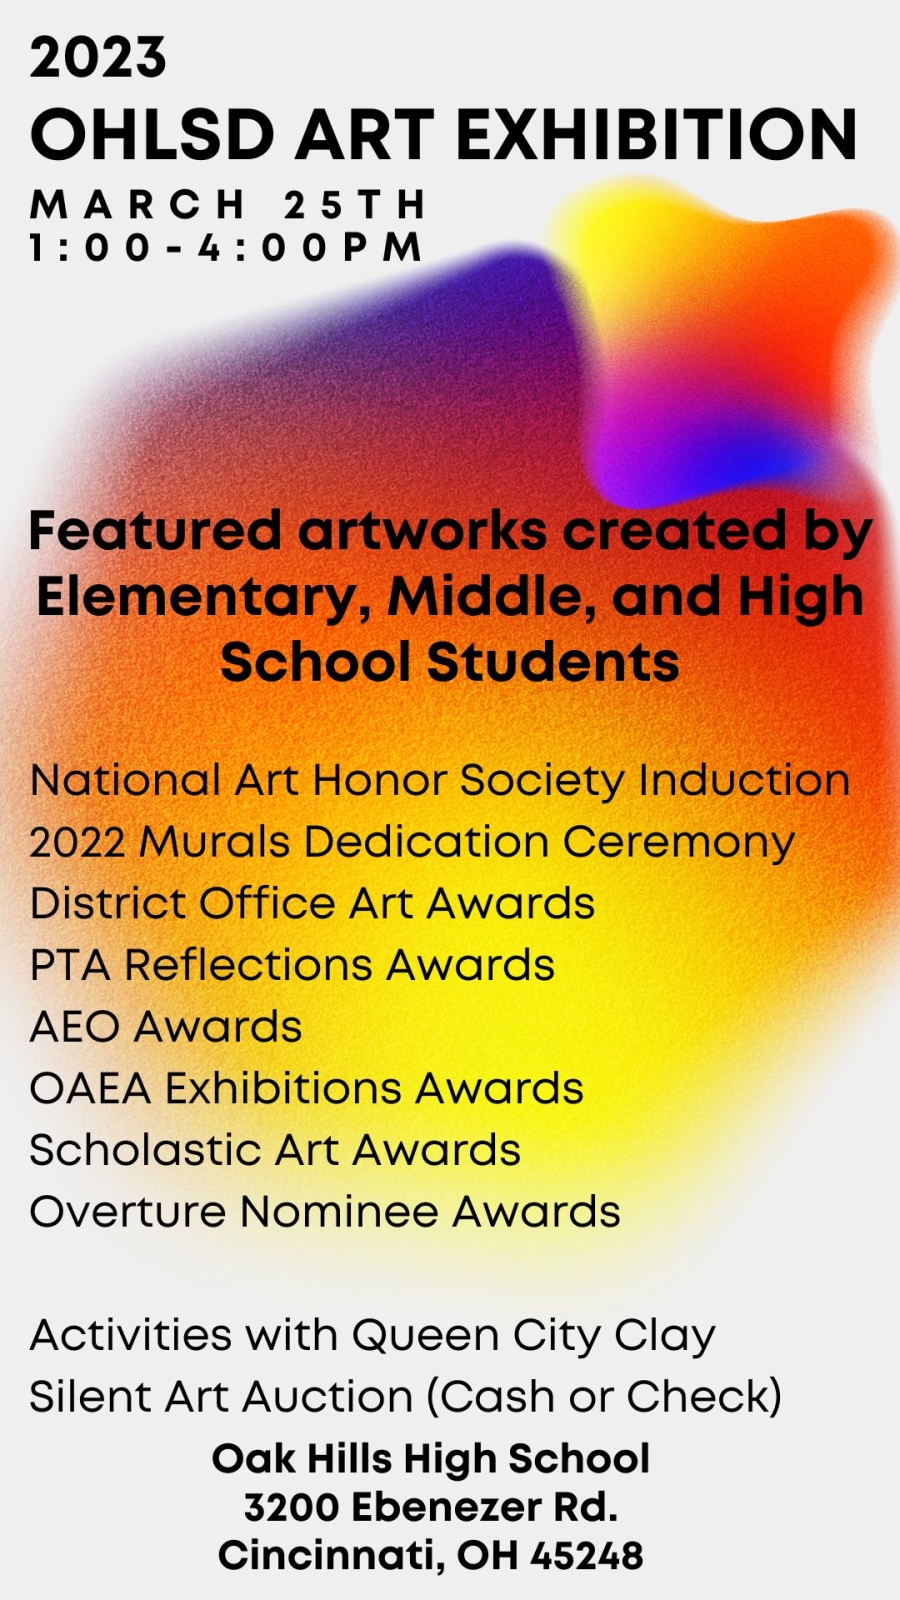 Save the Date for the OHLSD Art Exhibition and Events!